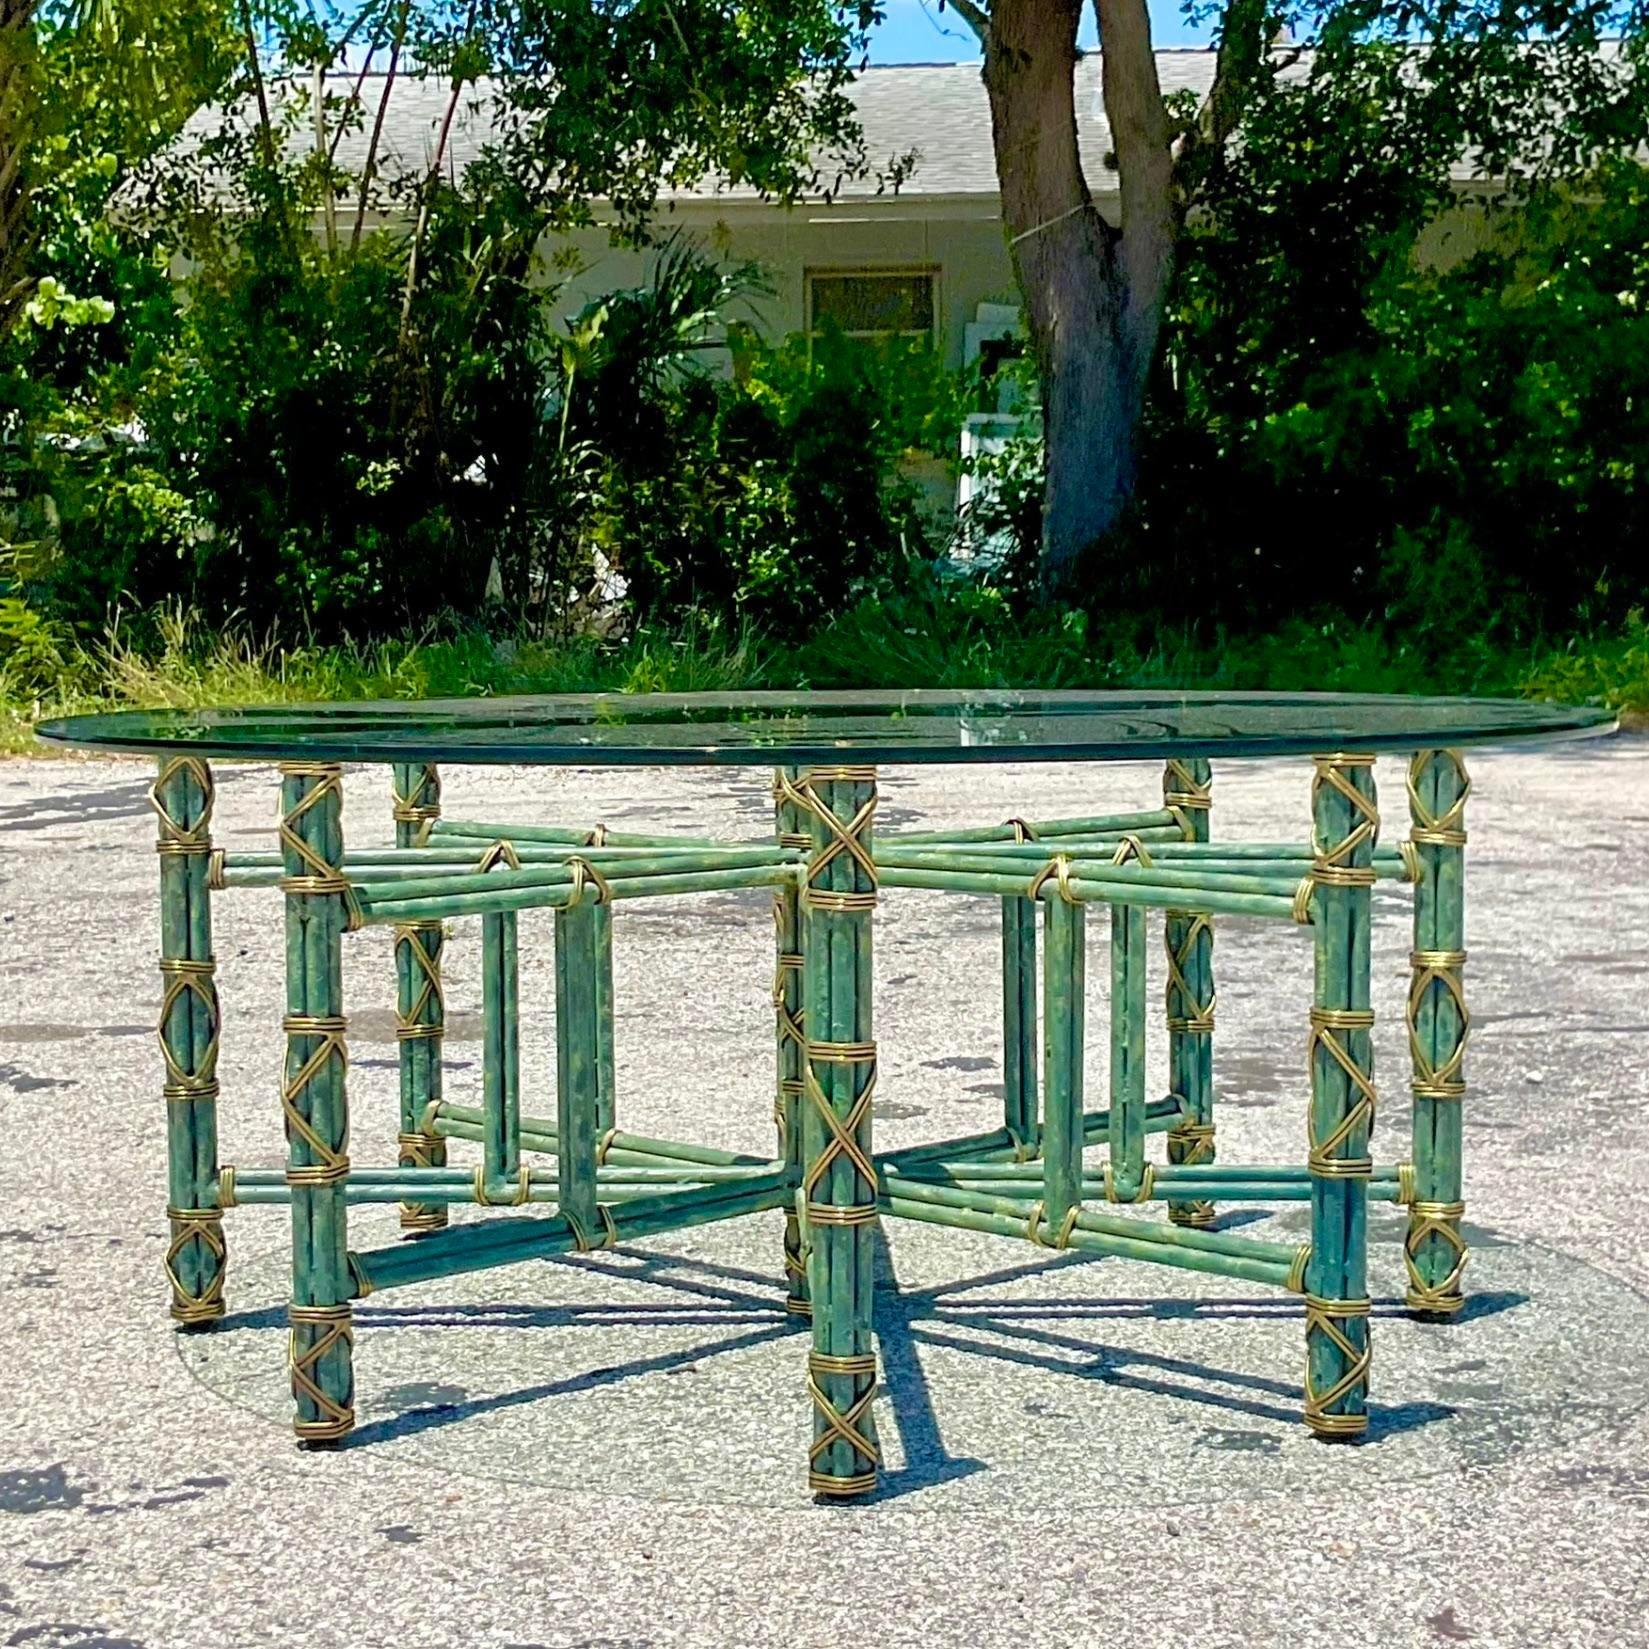 A fabulous vintage Regency coffee table. Made by the iconic Maitland Smith group..A chic patinated metal in a brilliant verdigris finish. Brass wraps at the joints. Acquired from a Palm Beach estate.